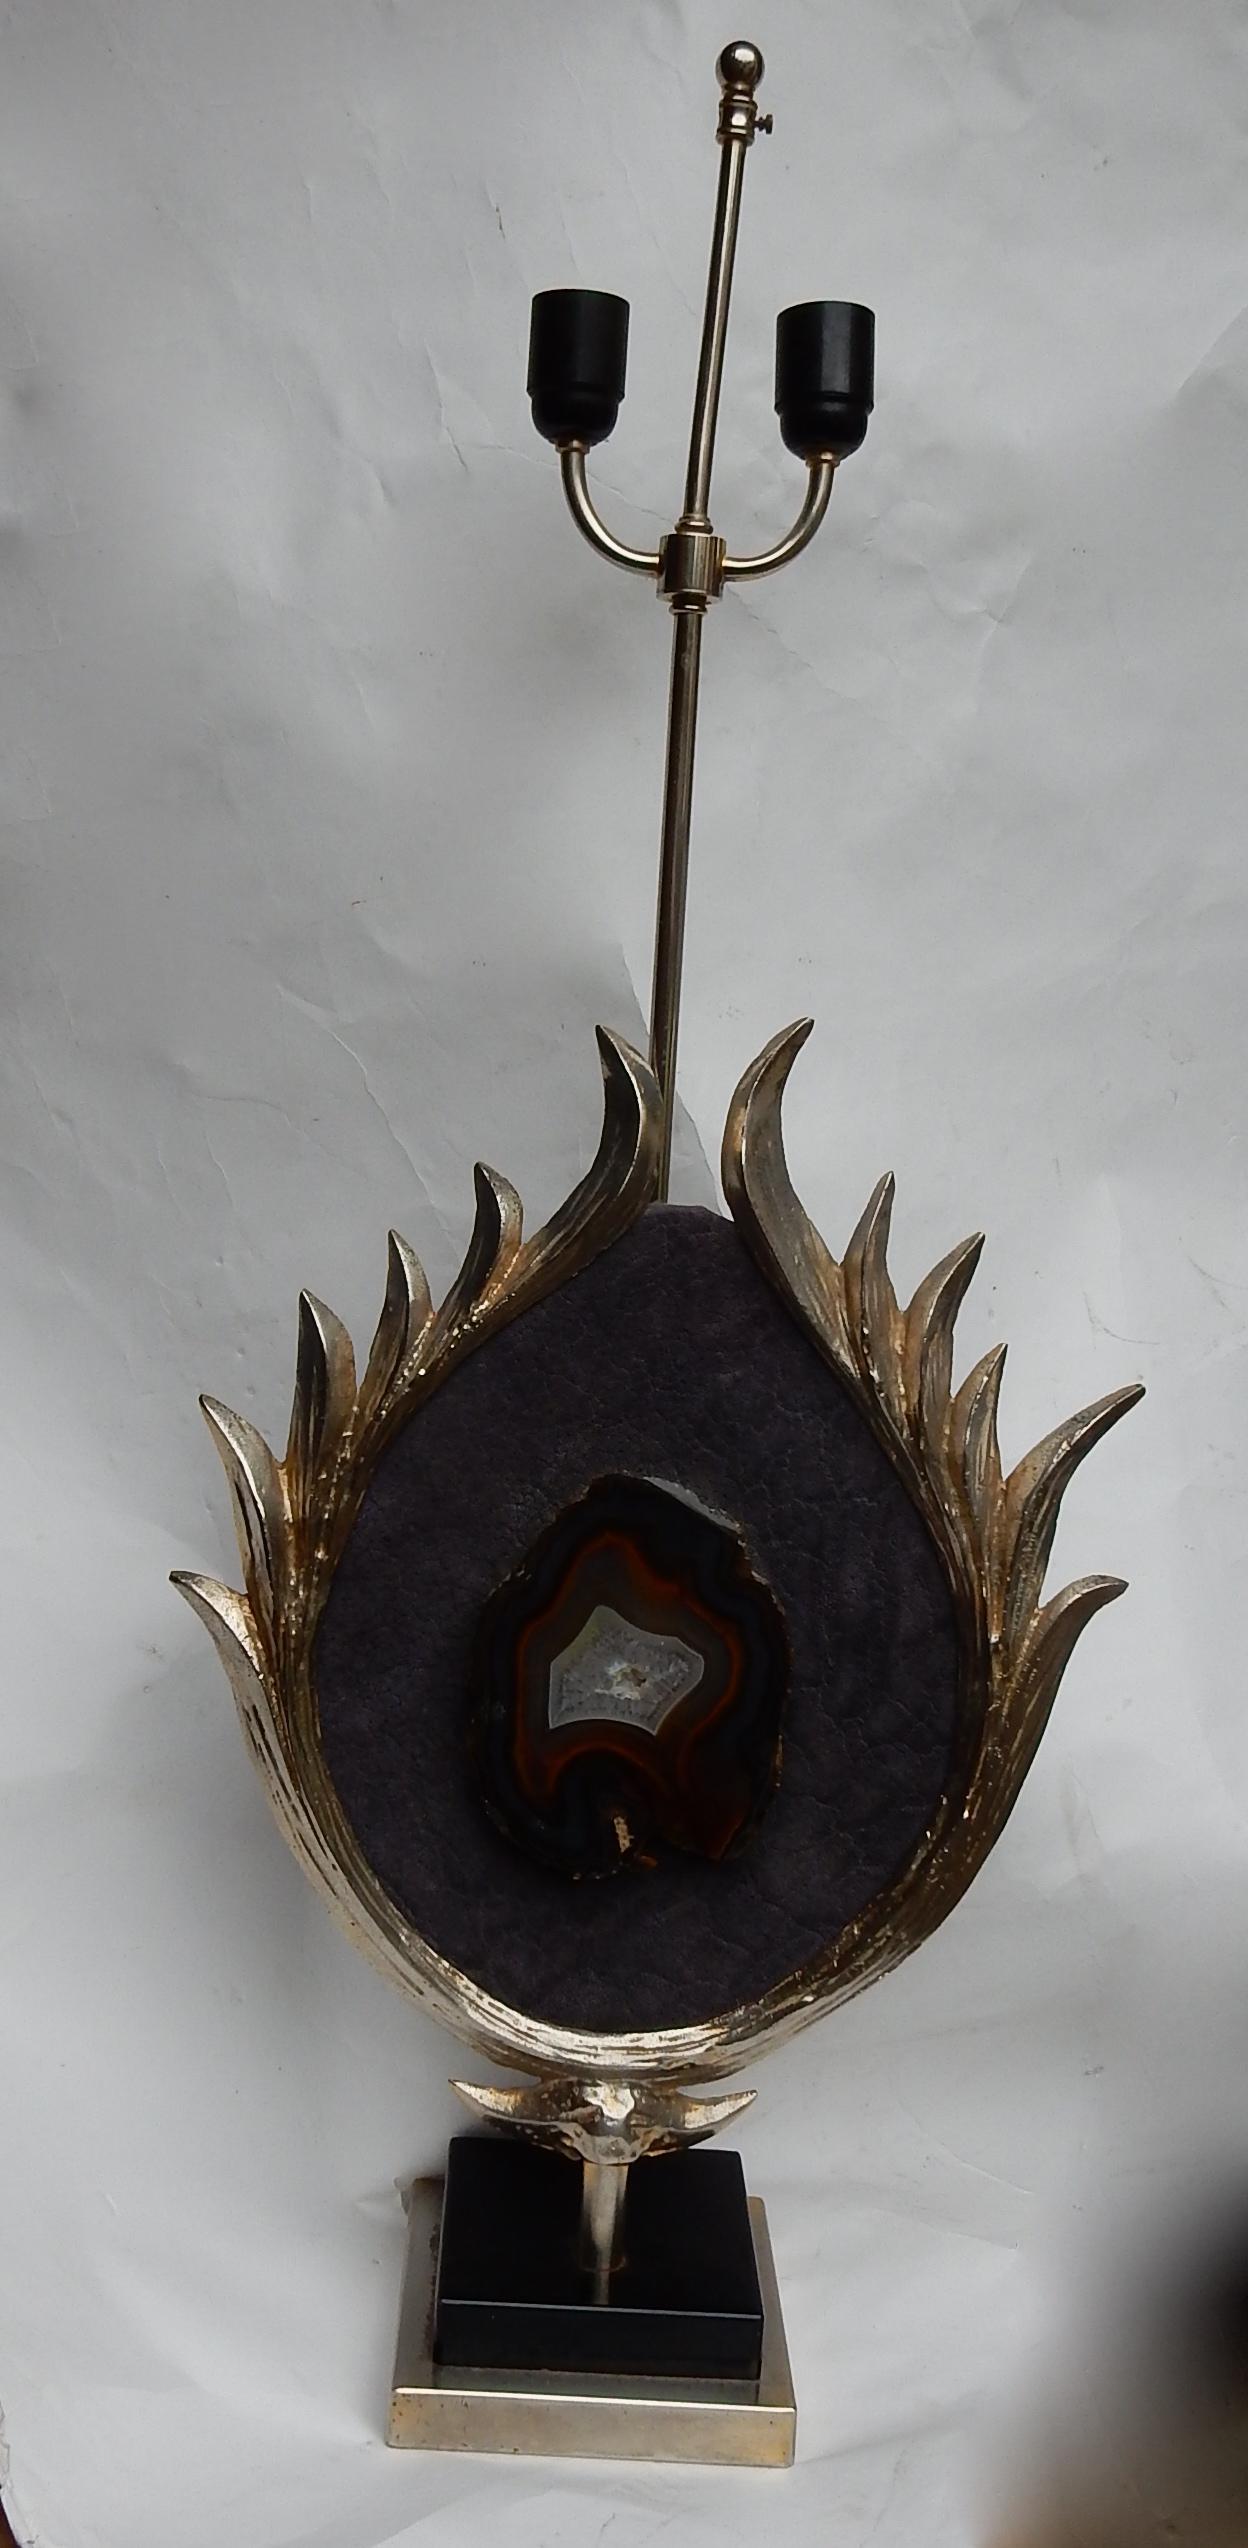 Polished 1970 Decor Lotus Lamp Silver Bronze, Shagreen, Agate, Duval Brasseur Unsigned For Sale